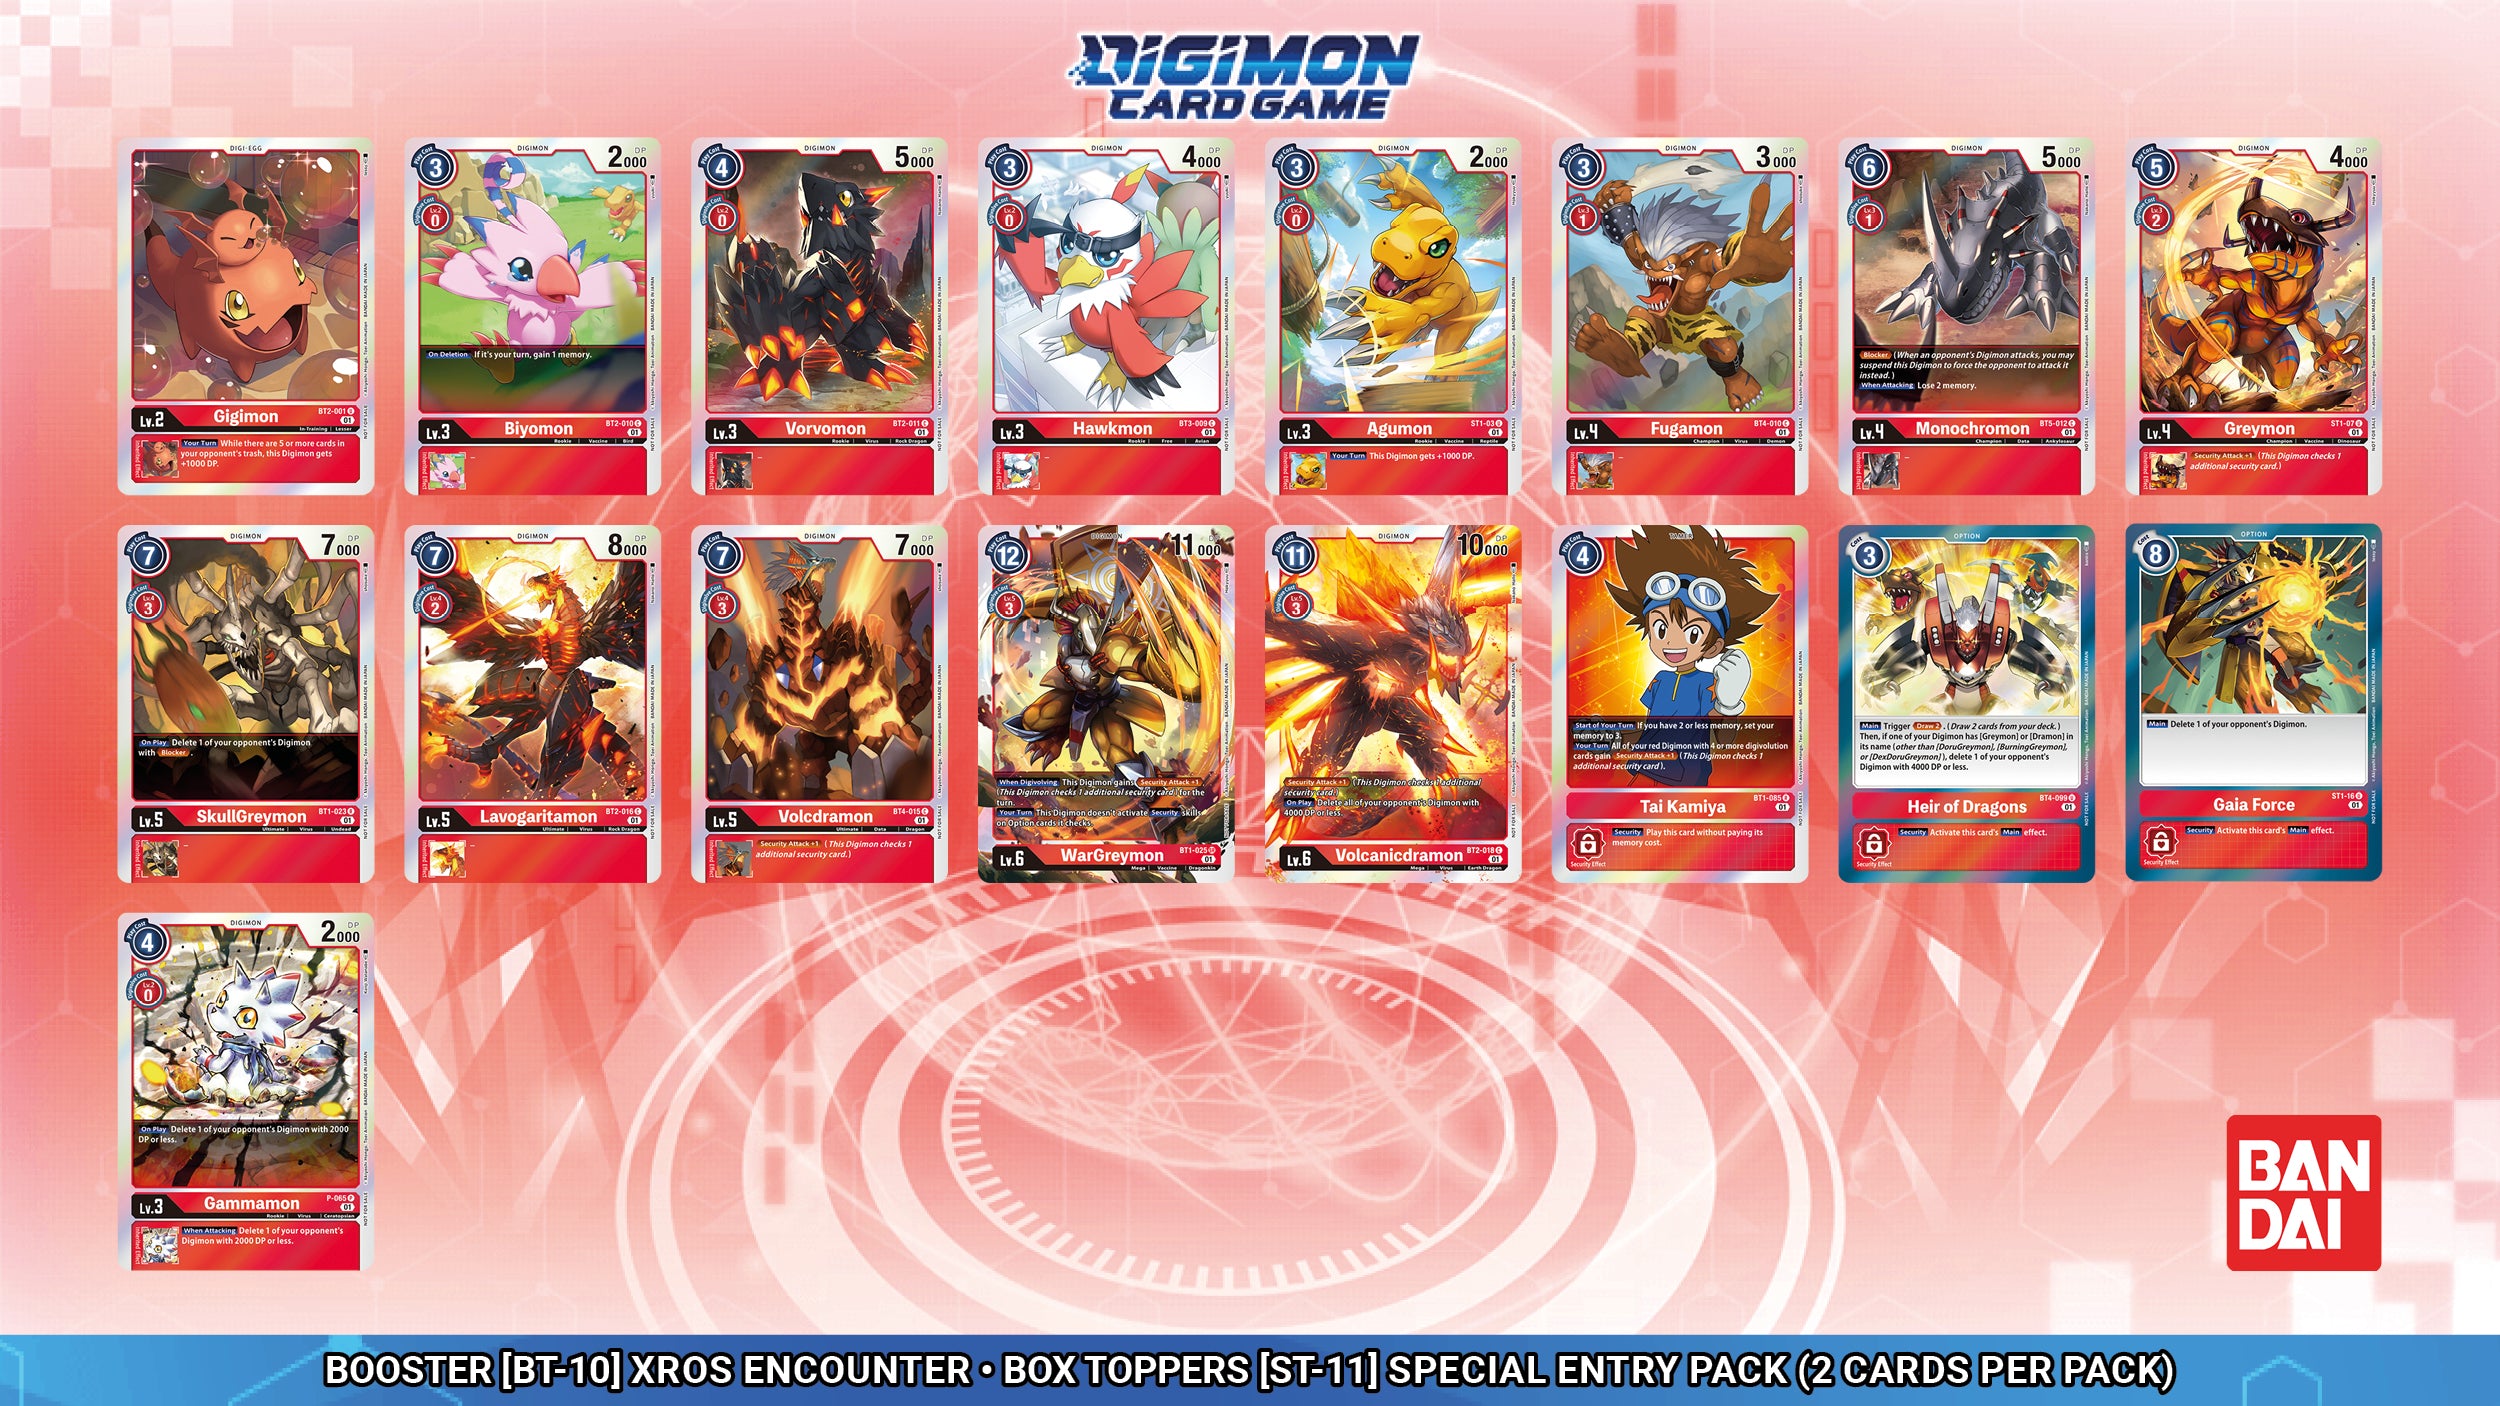 Digimon ST11 Special Entry Pack